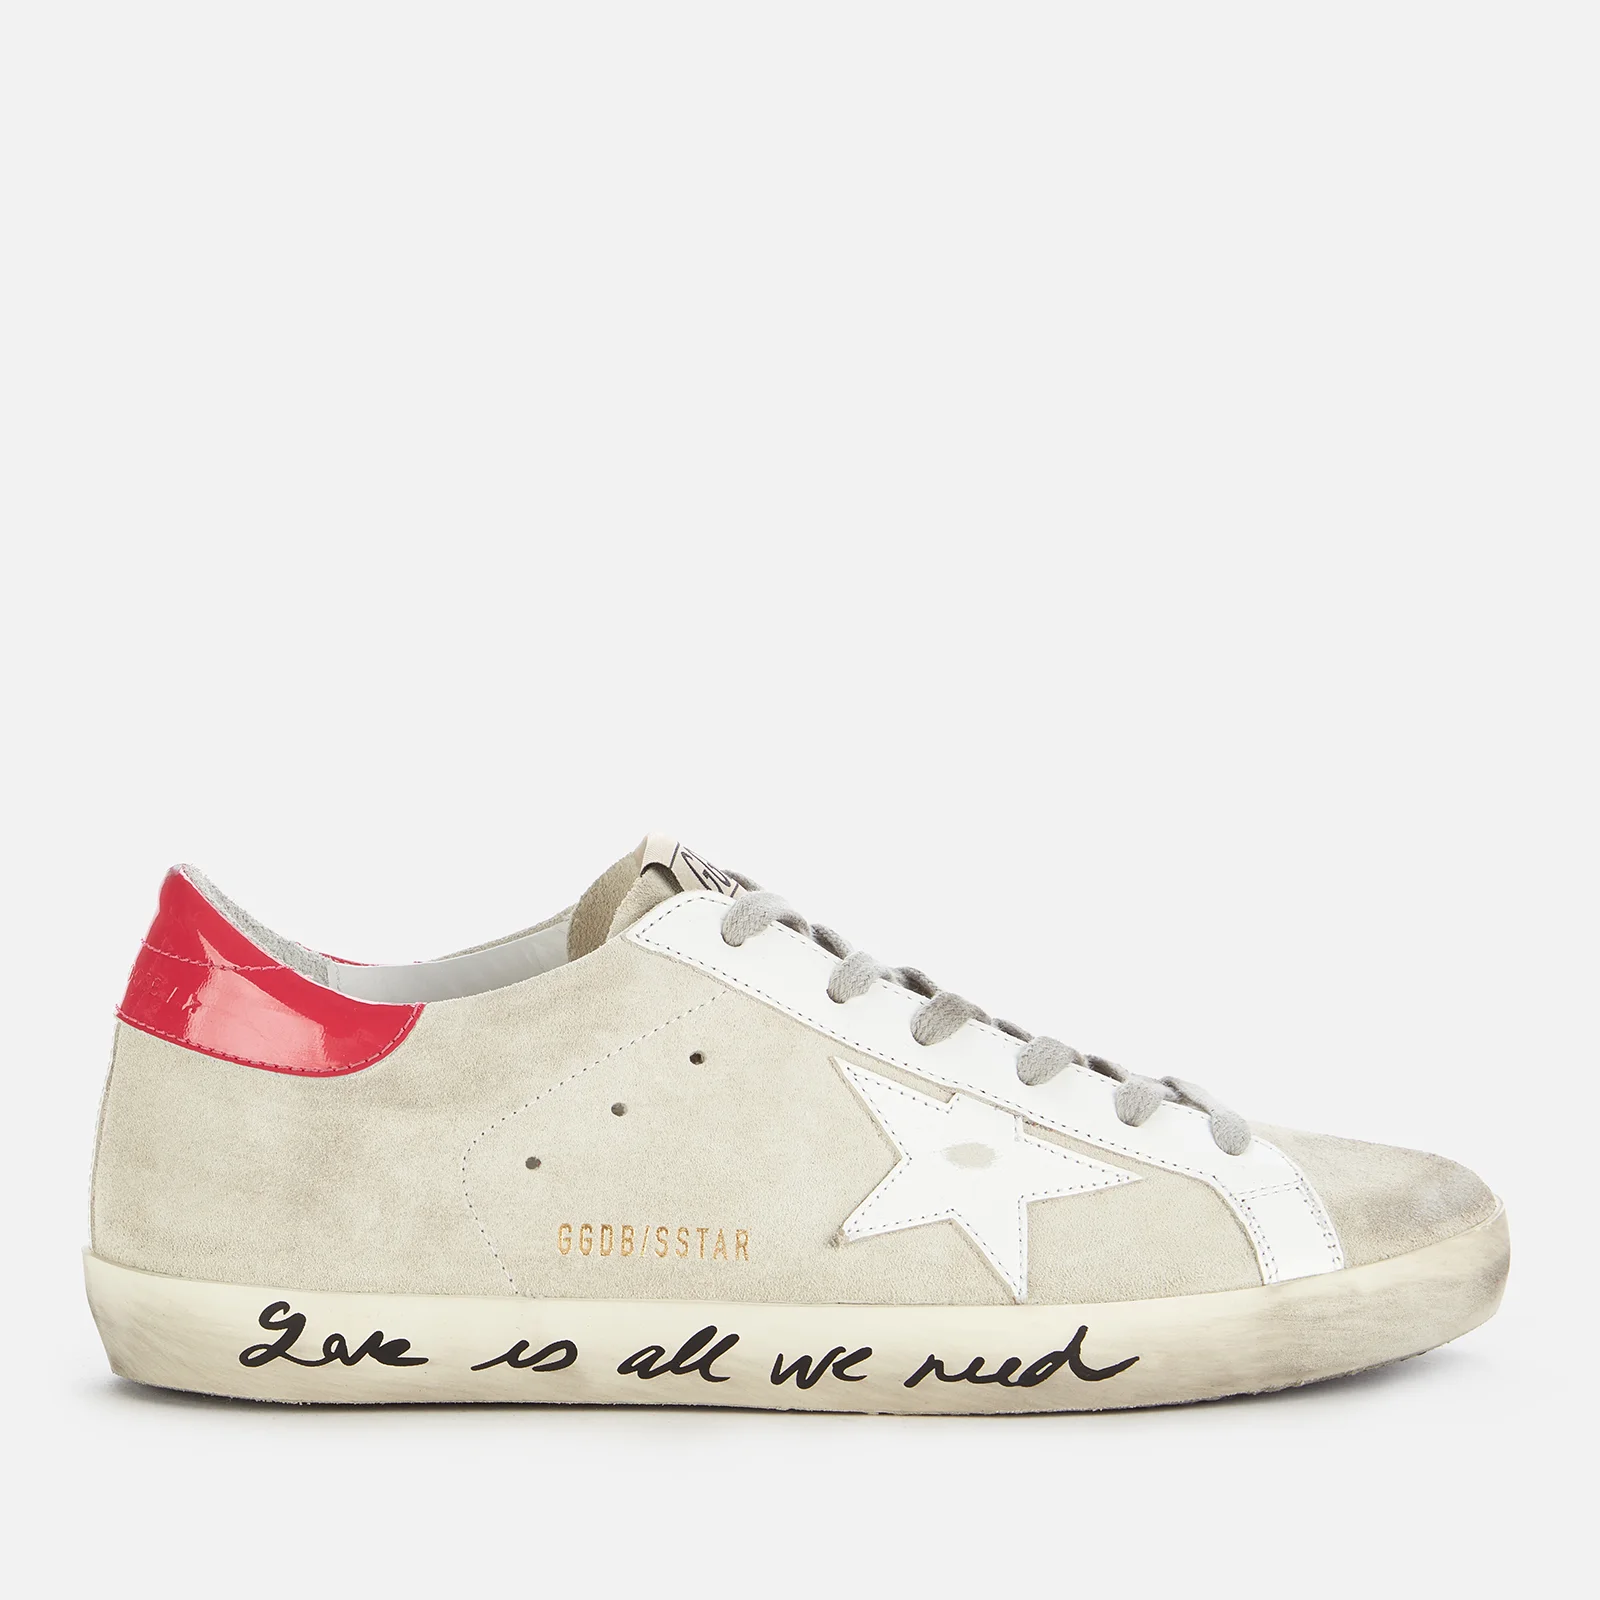 Golden Goose Women's Superstar Suede Trainers - Ice/White/Light Red Image 1